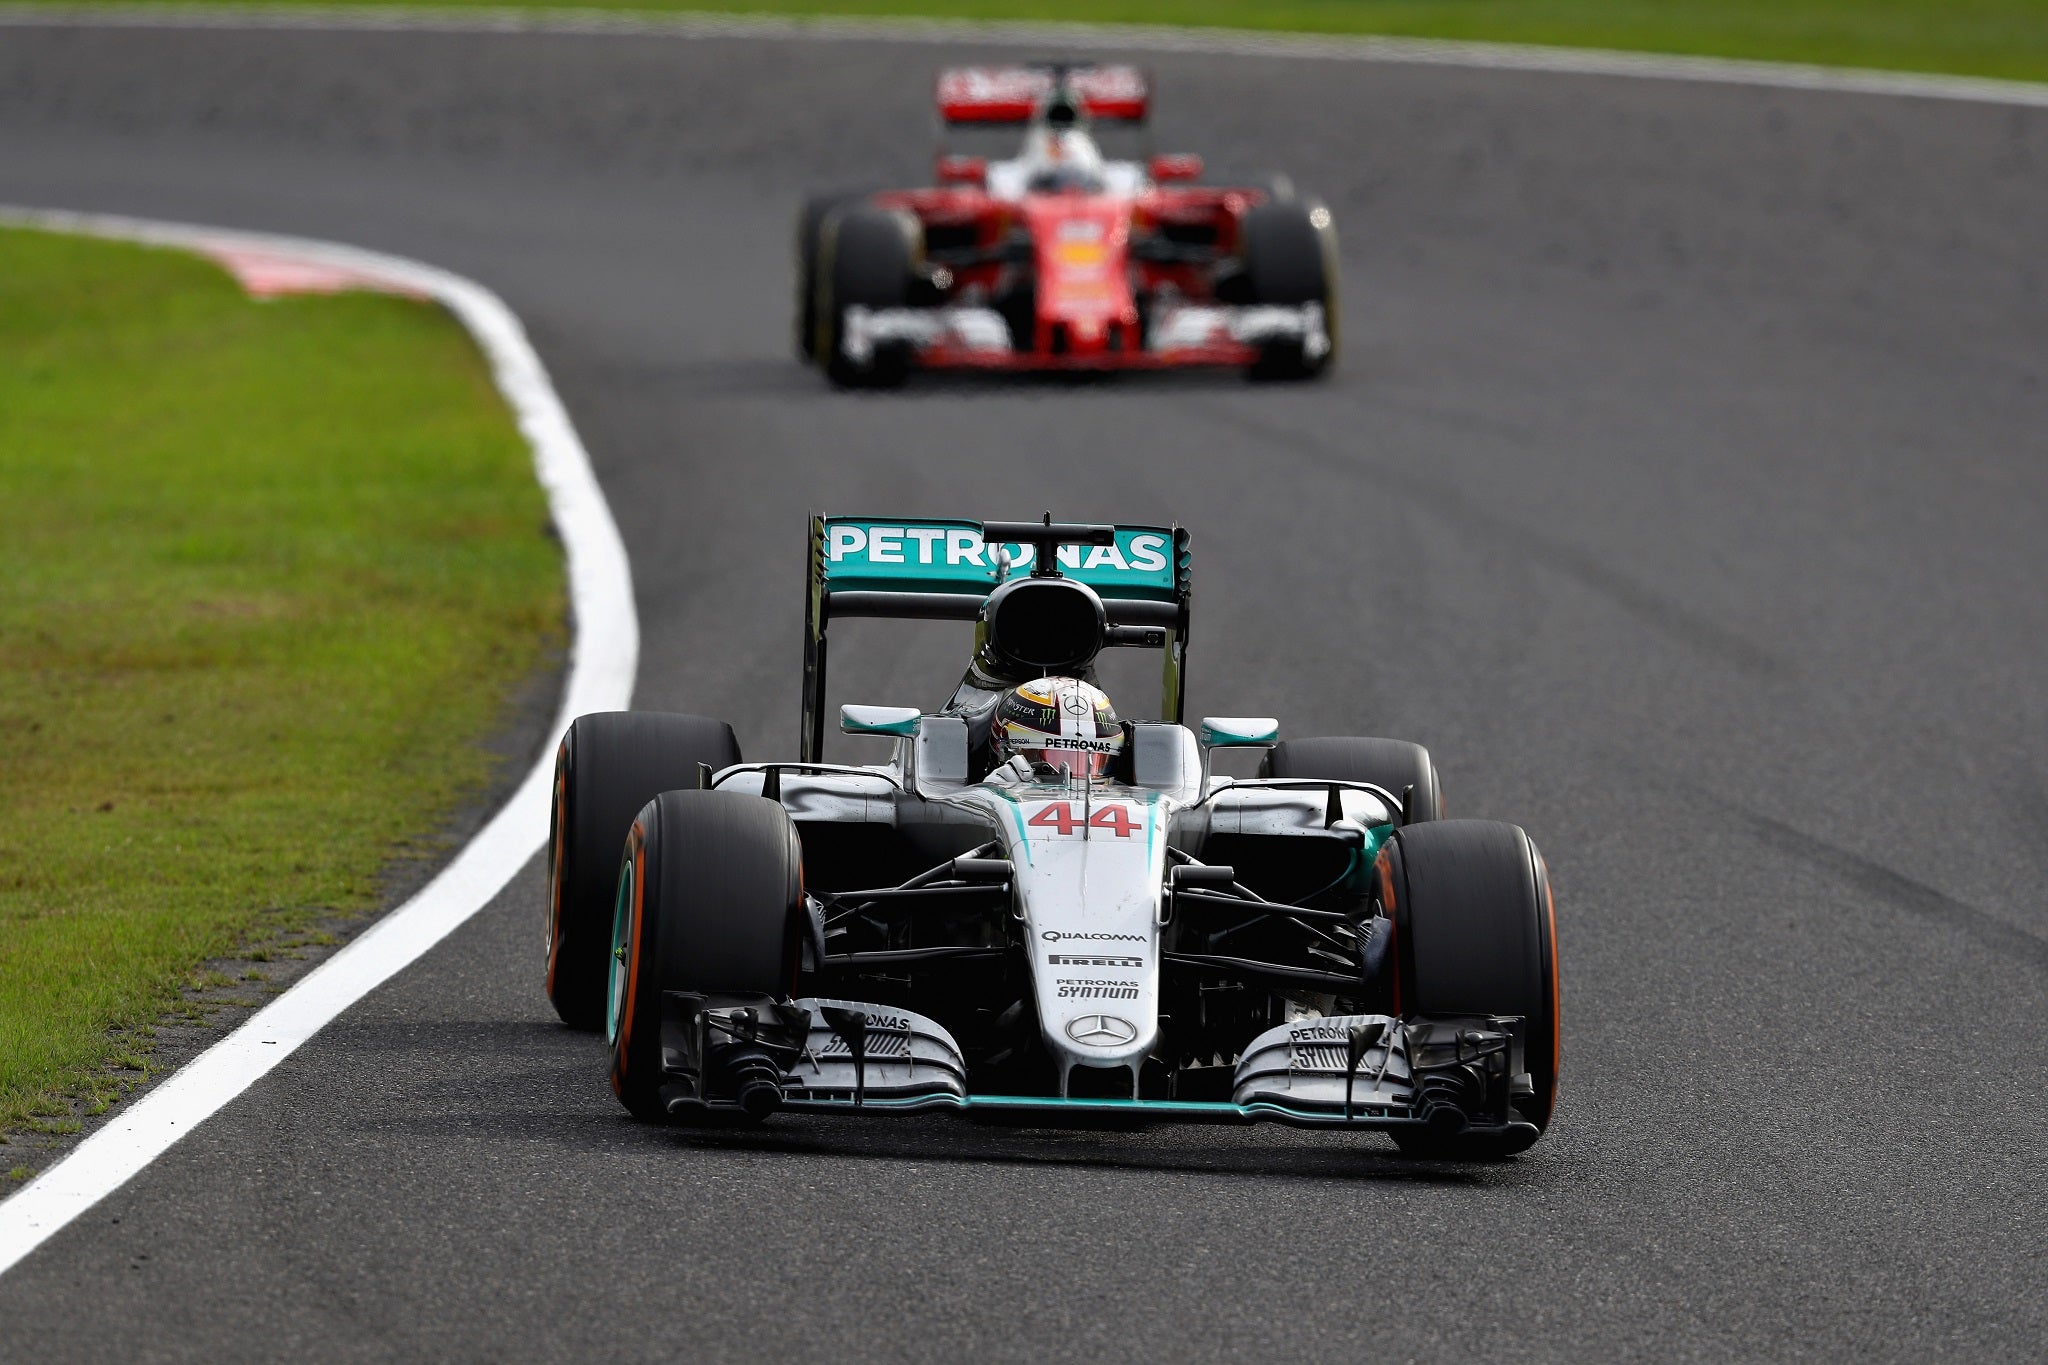 &#13;
Hamilton now trails Rosberg by 33 points in the drivers' championship &#13;